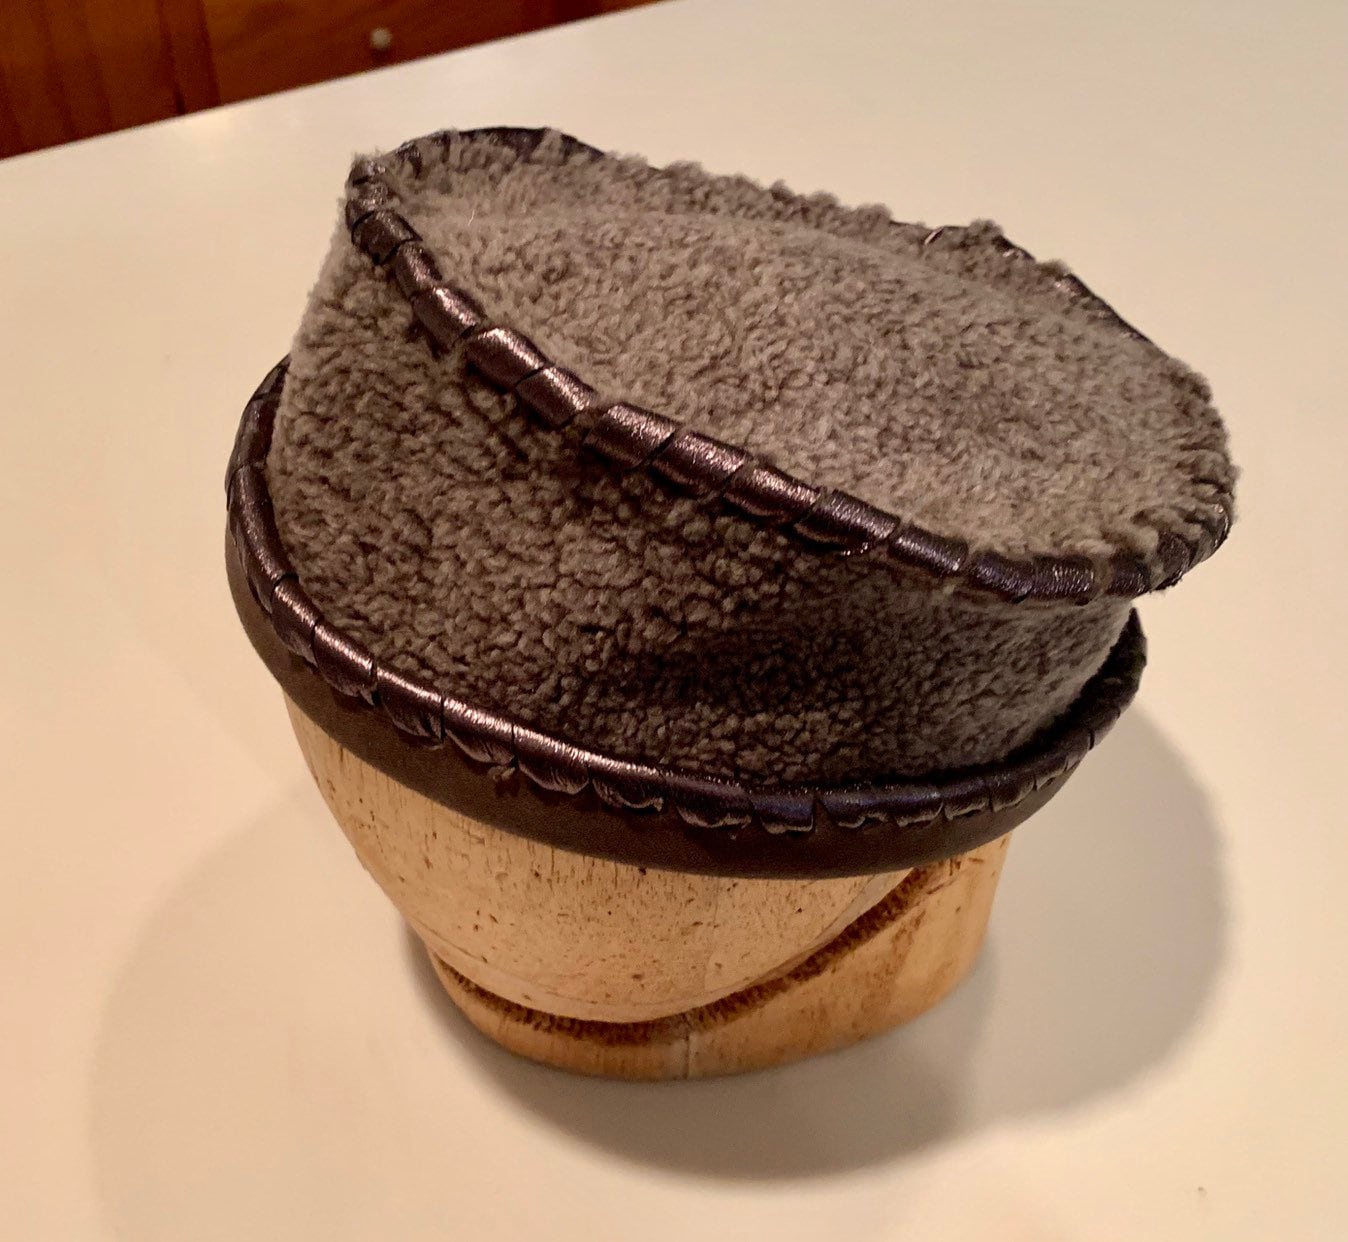 Taupe Shearling Hat with Iridescent taupe Leather Lashing! Very warm and cozy- perfect Gift! Winter Hat for Style and Beauty-Handmade Hat!